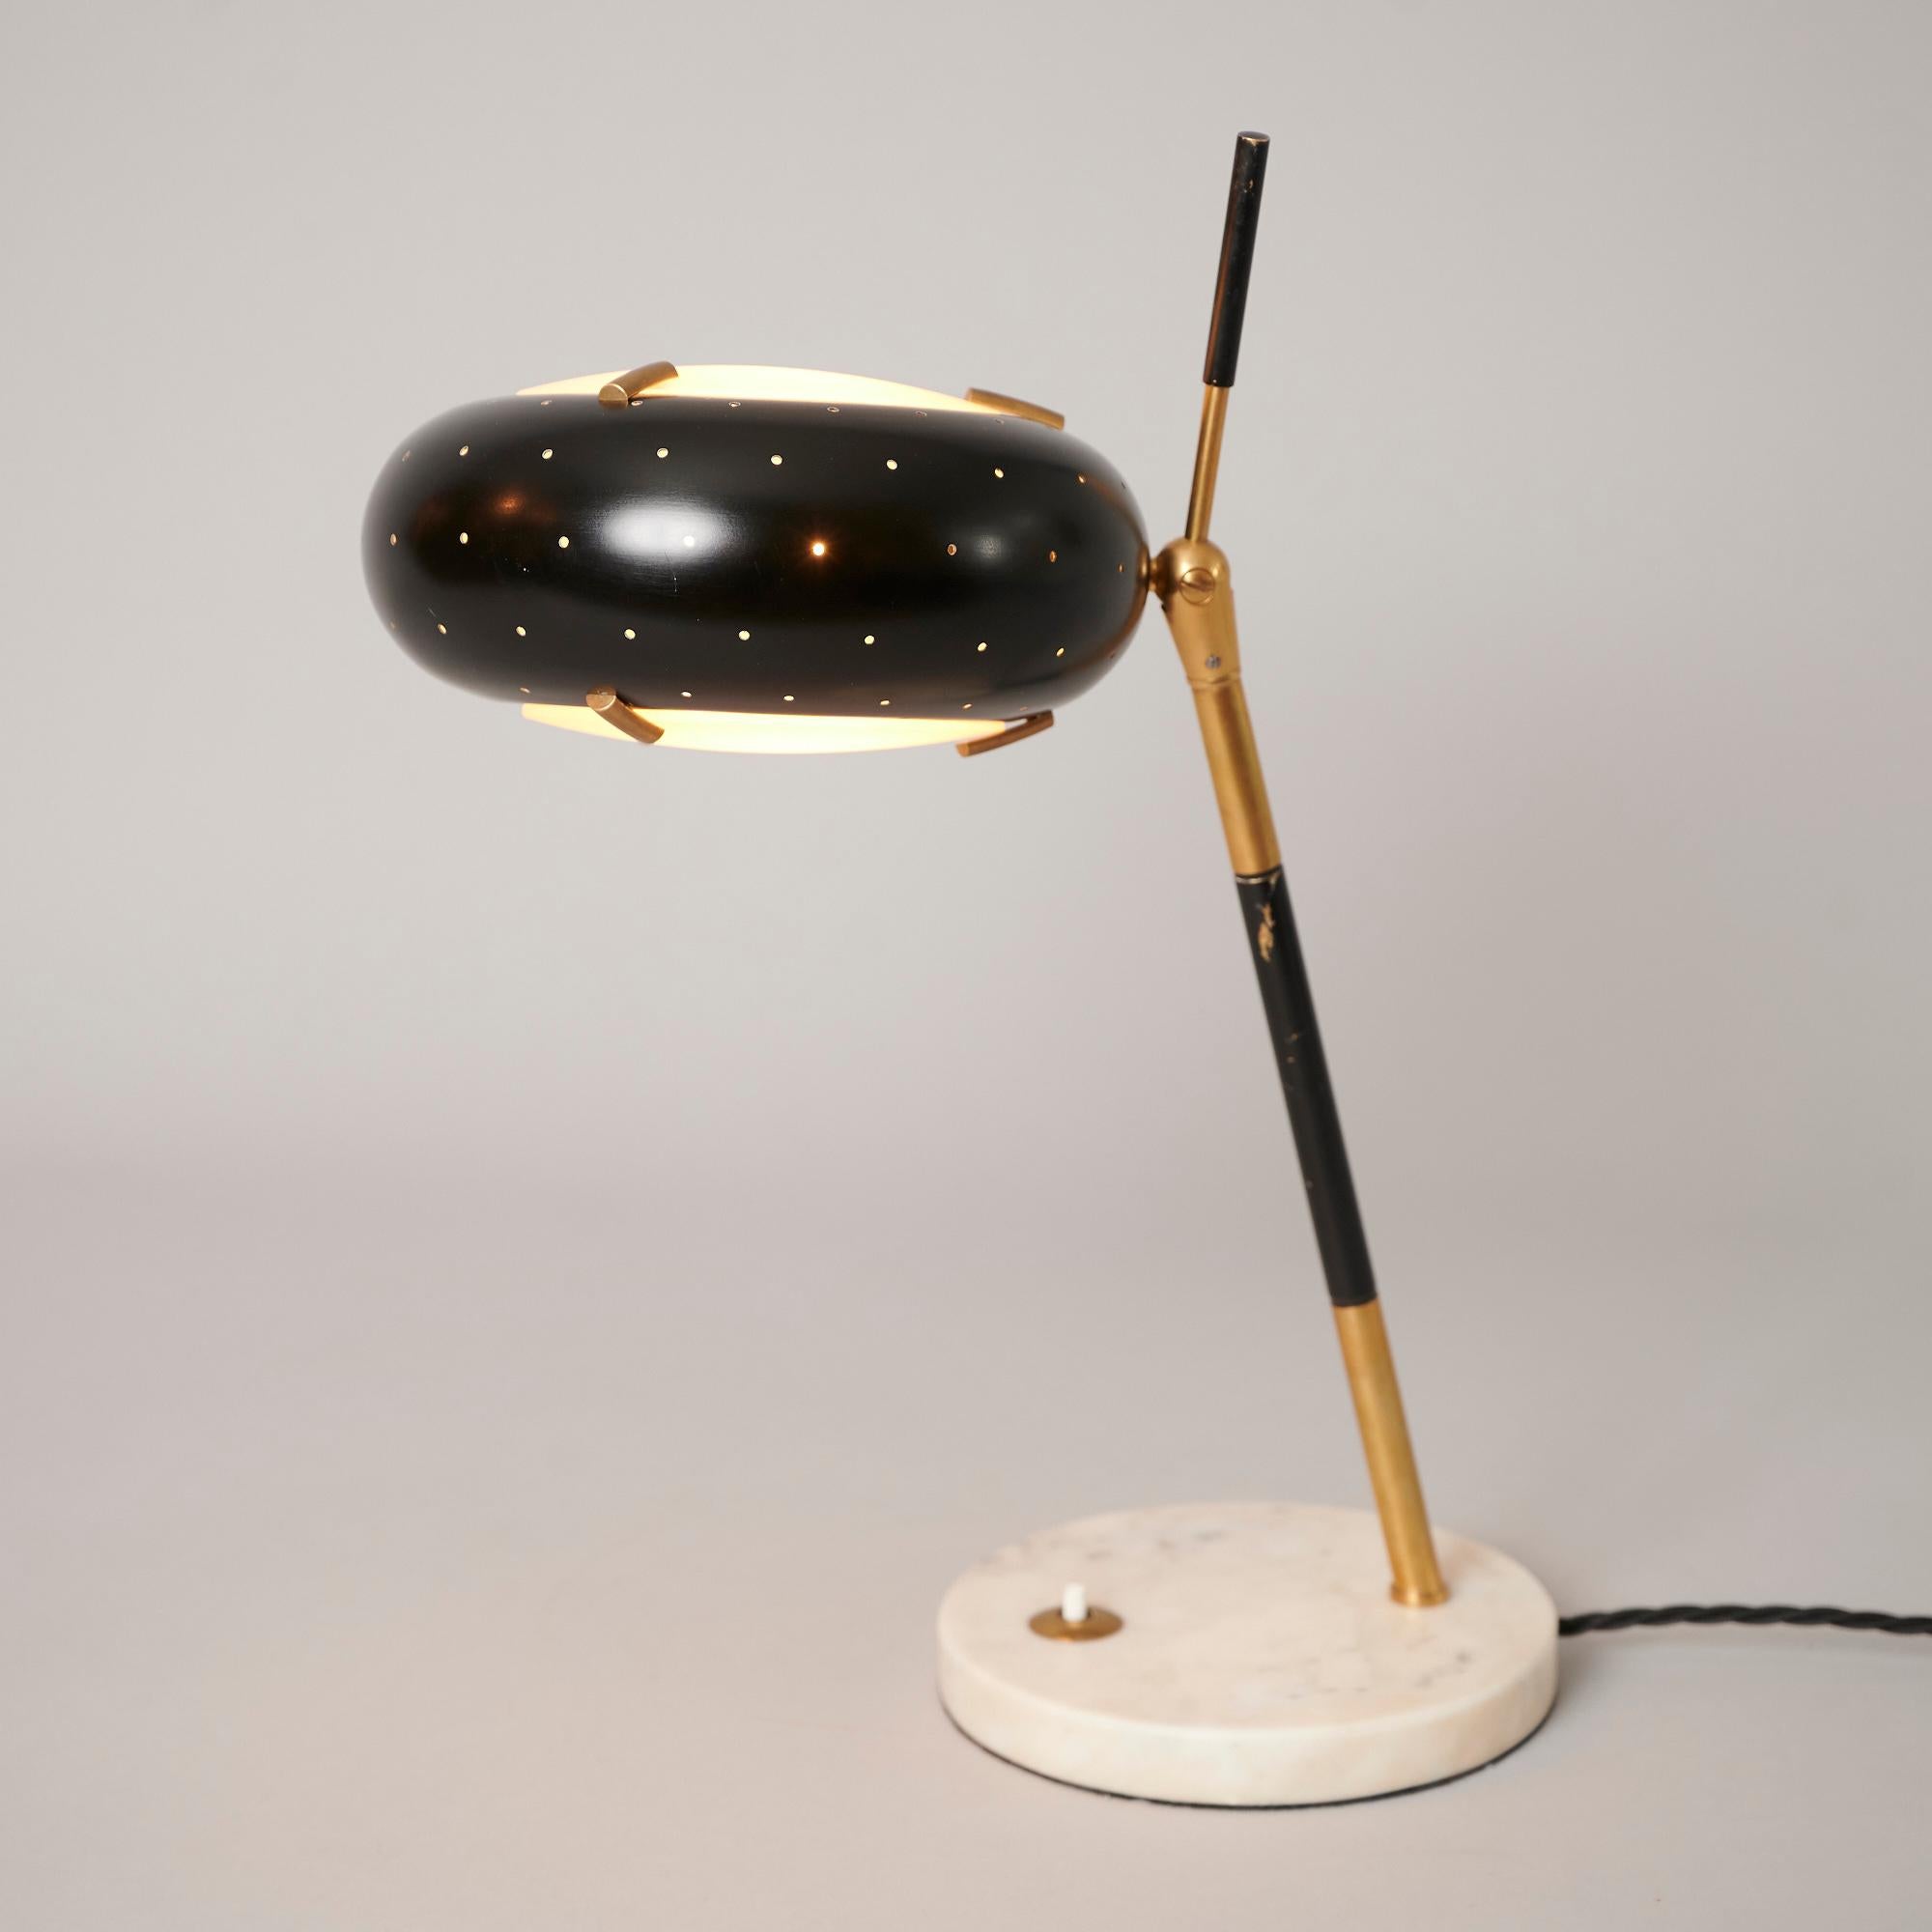 Wonderful table light by Stilux. 

Black lacquered shade with frosted glass. Brass details and marble base.

A truly beautiful lamp!

Re wired for the U.S. and for Europe. In lovely vintage condition.